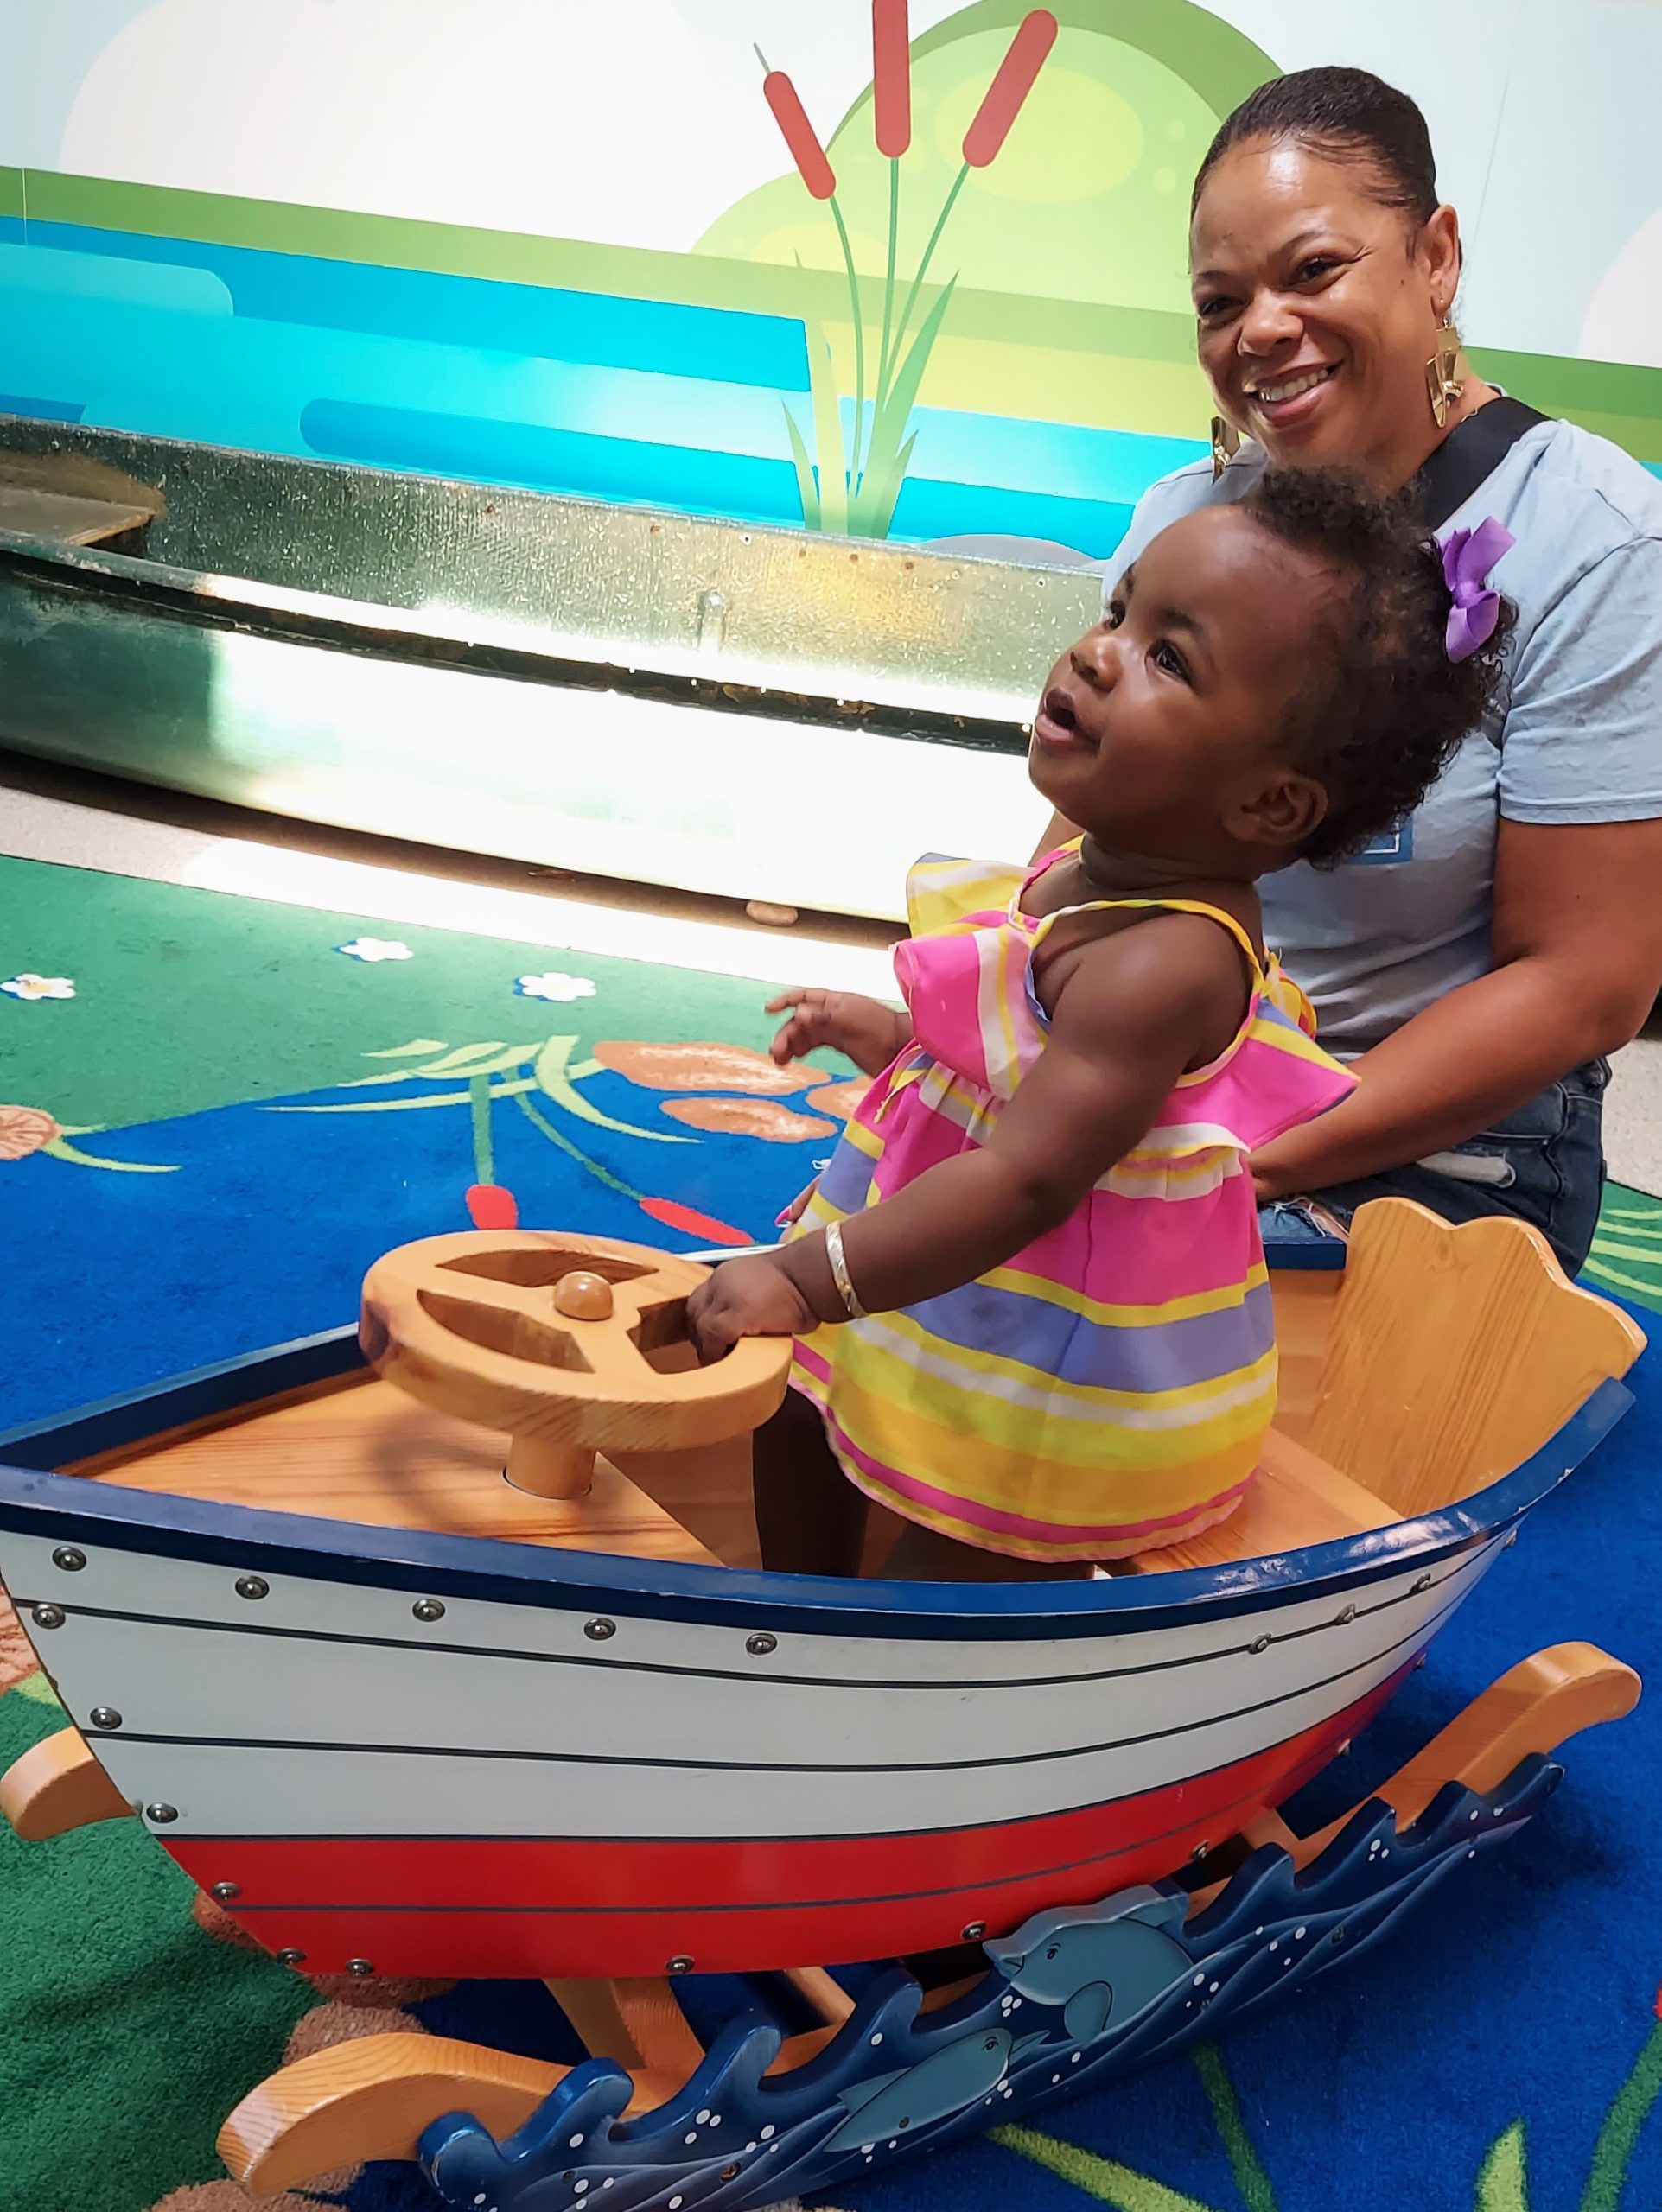 A baby smiles while riding a rocking boat toy in Camp Rancho, with her mother smiling in the background